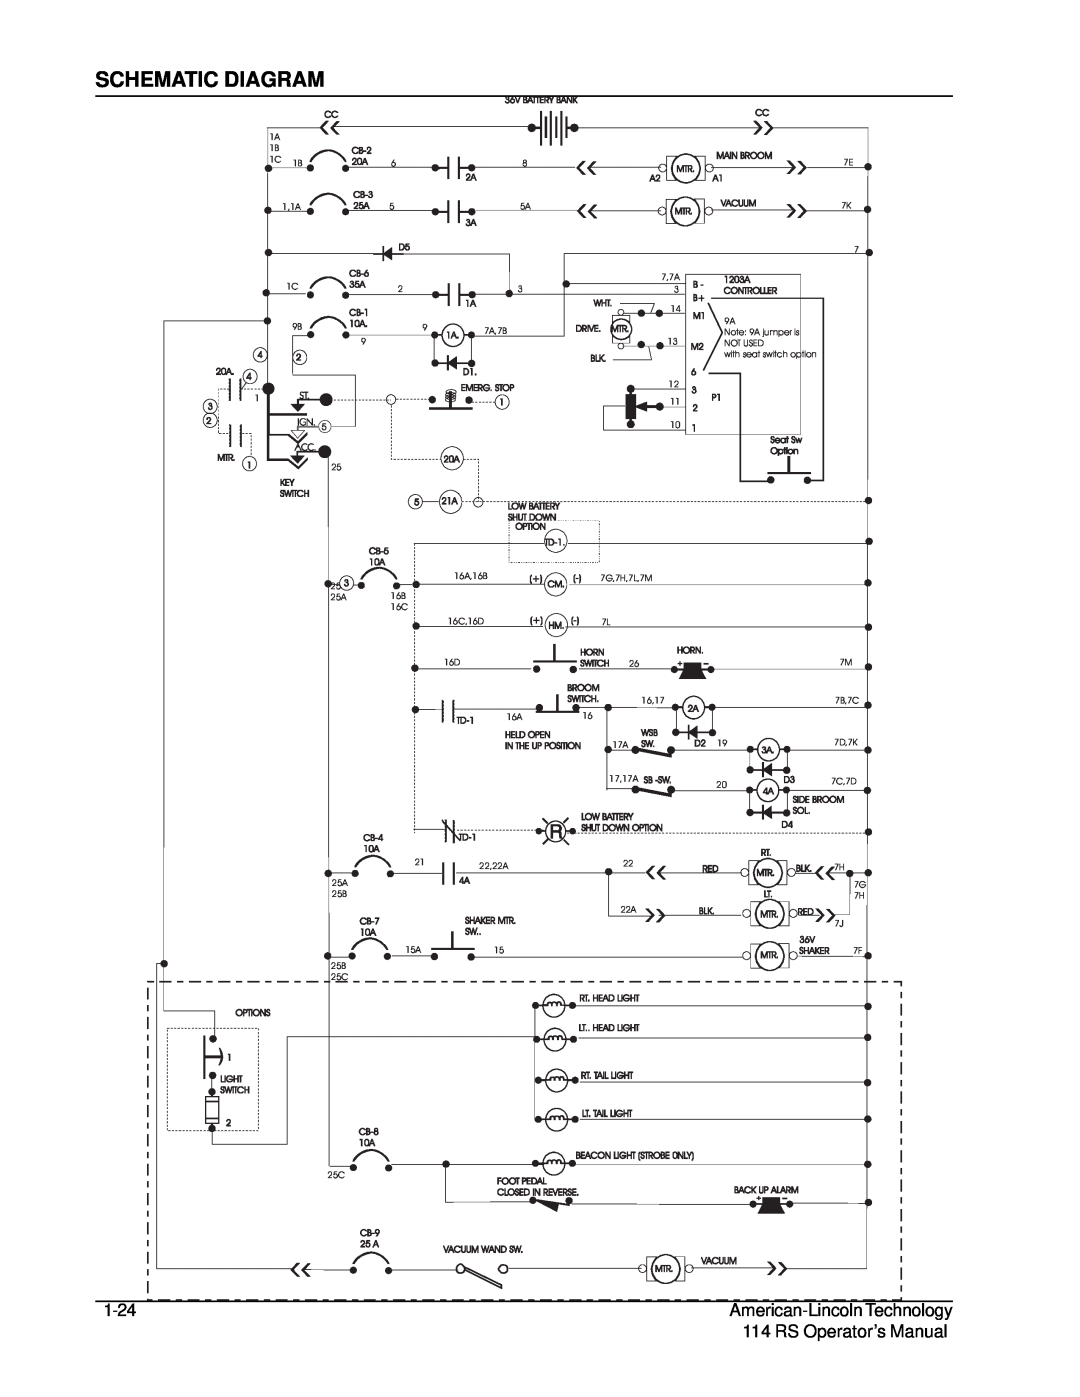 Nilfisk-ALTO 114RS SWEEPER manual Schematic Diagram, 1-24, RS Operator’s Manual 